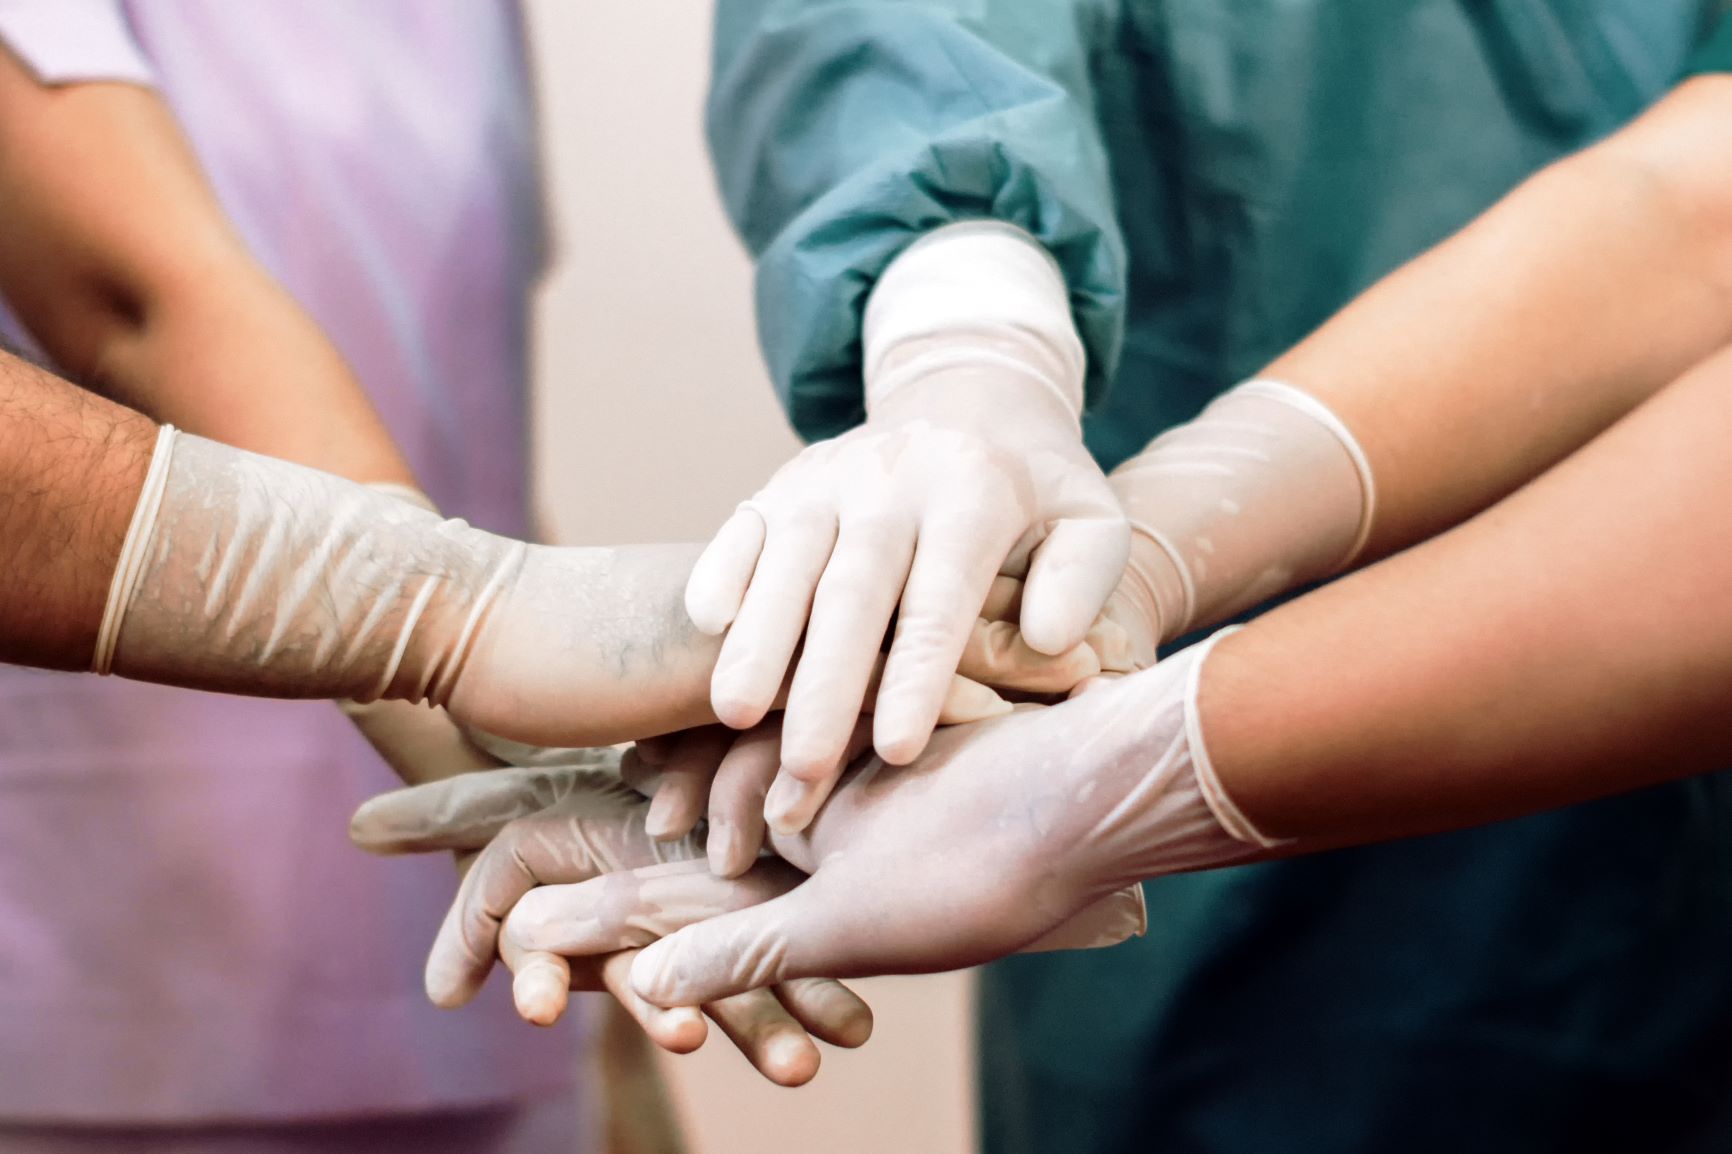 Hands in white medical gloves touching in a circle